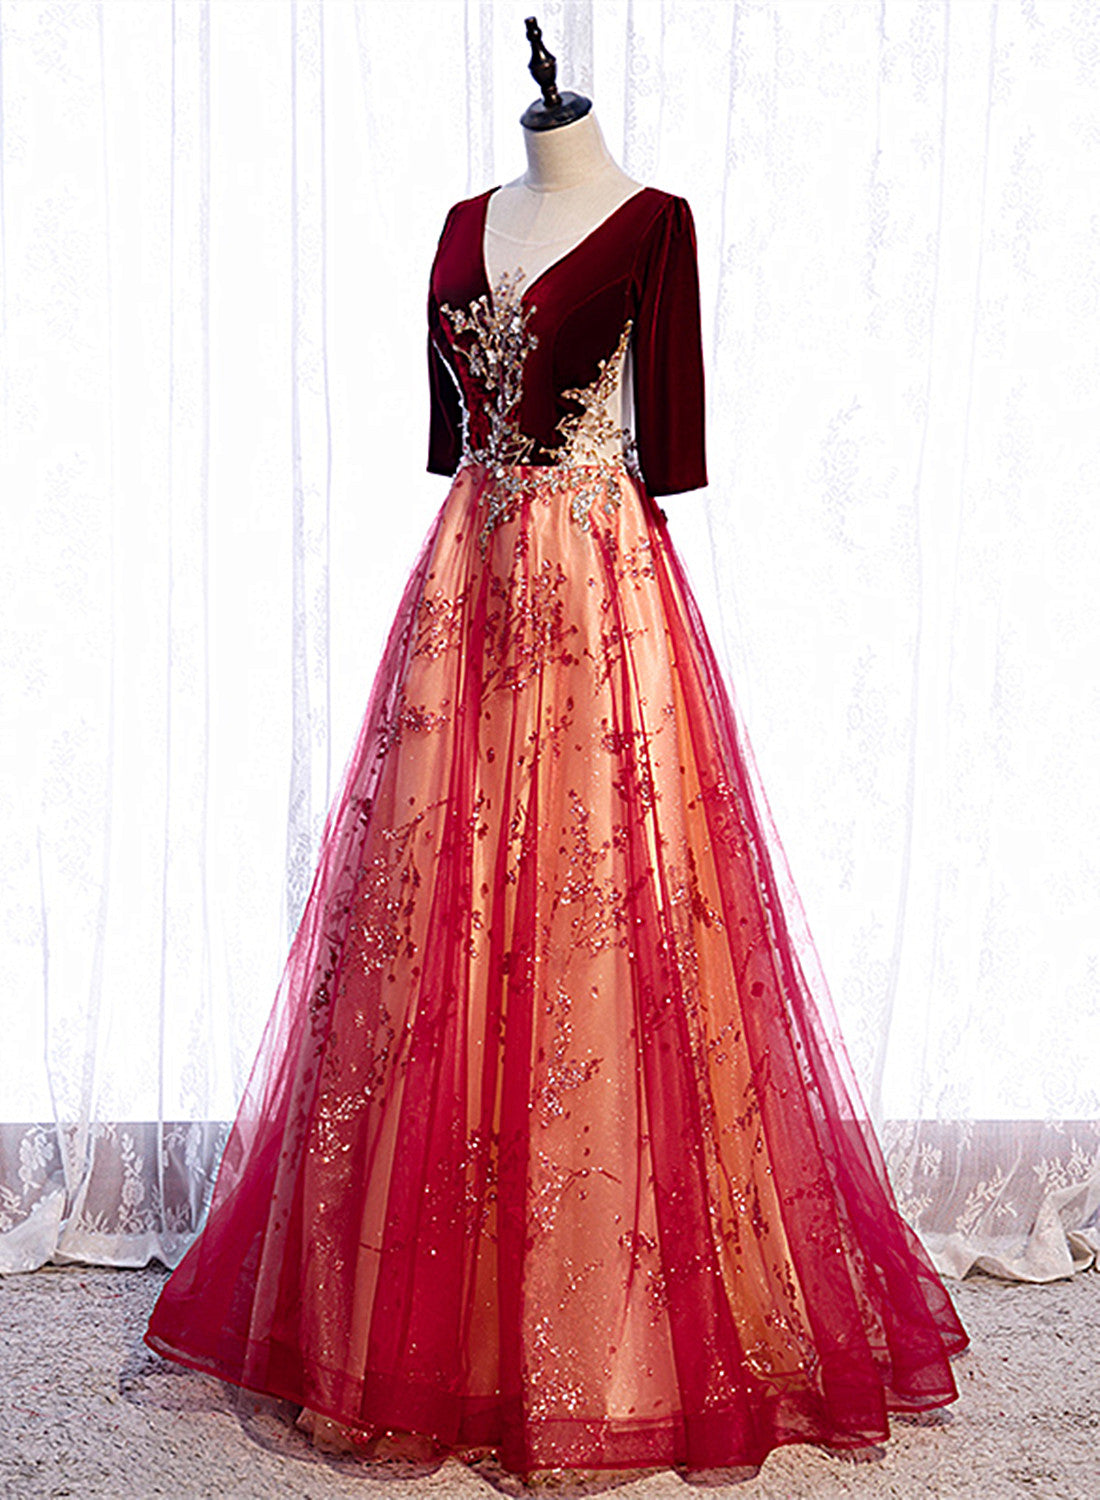 Party Dress Size 14, Wine Red Velvet 1/2 Sleeves Long Party Dress with Lace, A-line Junior Prom Dress